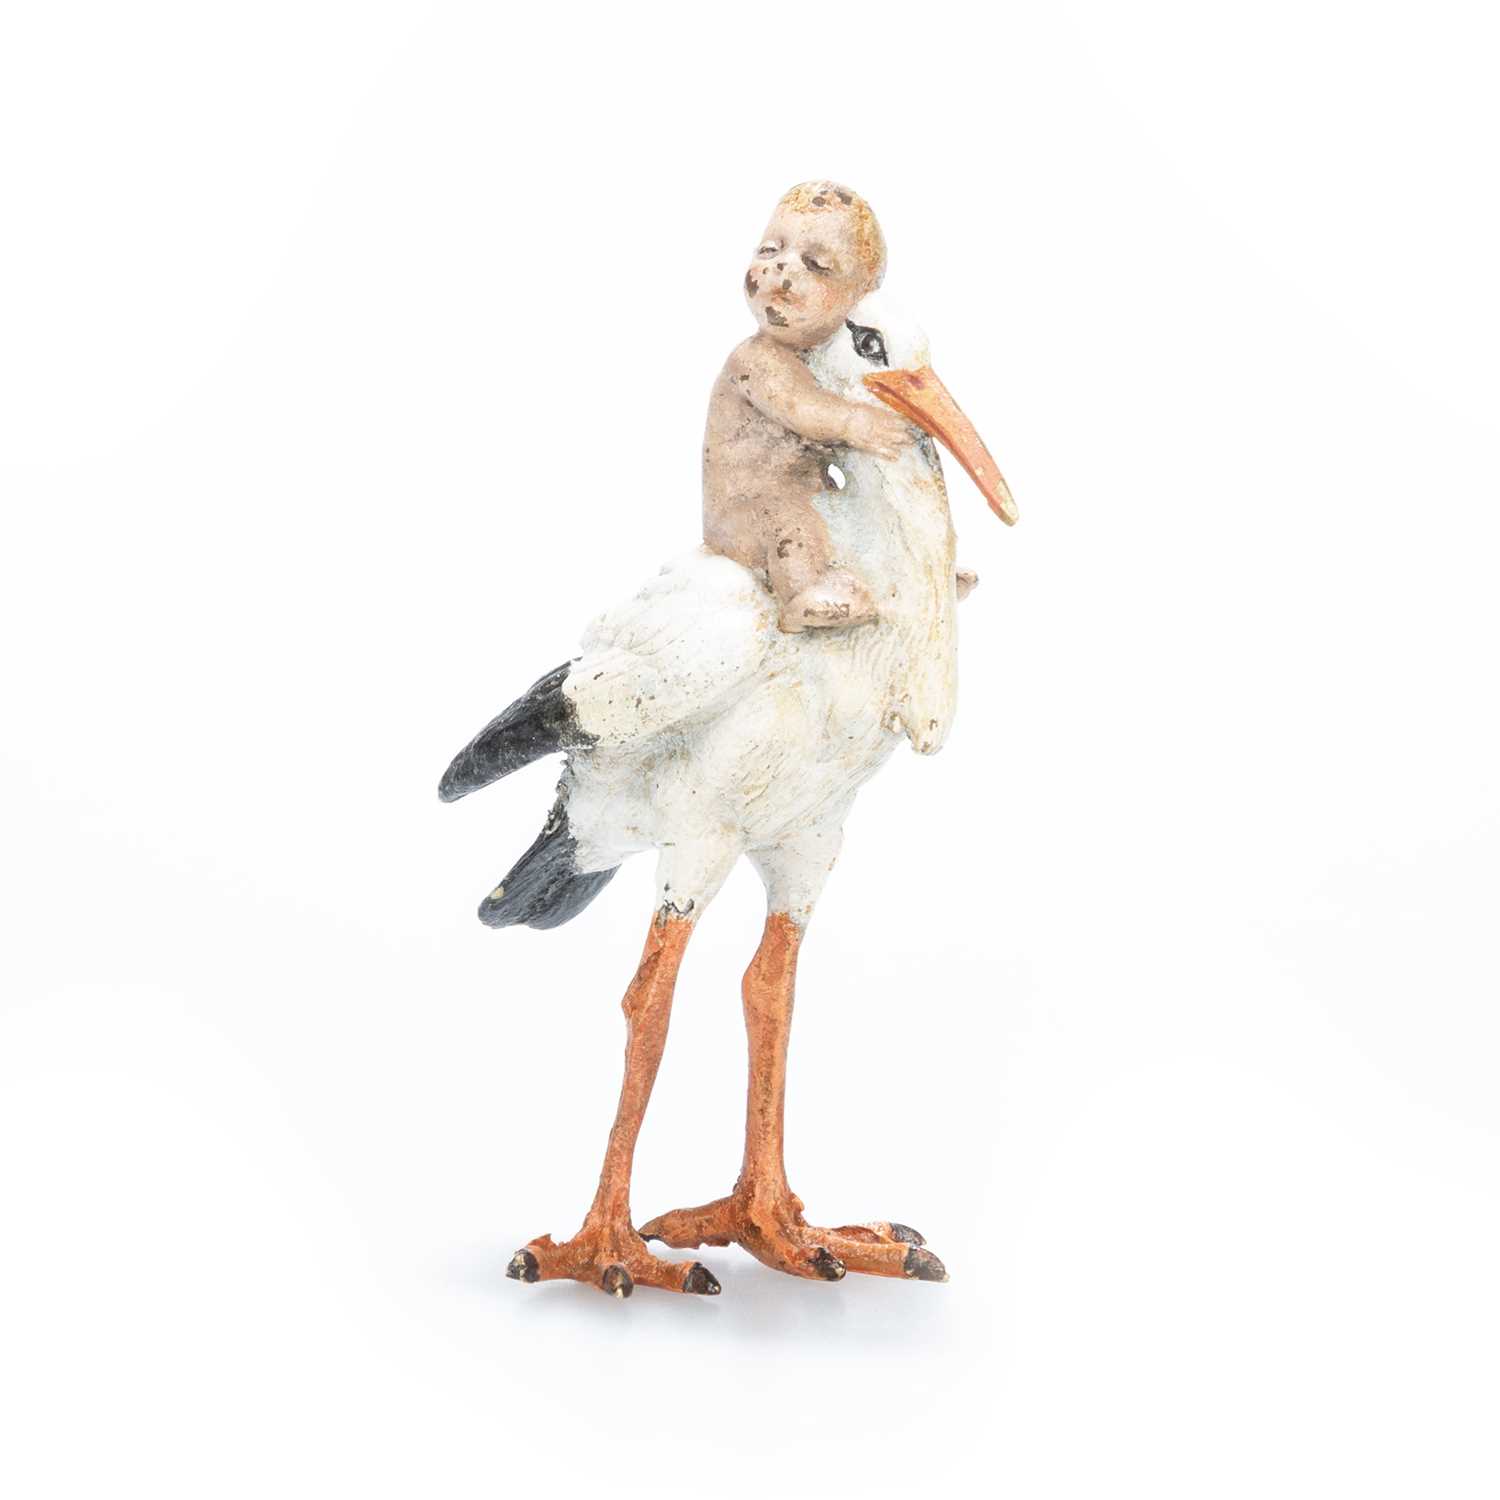 A COLD PAINTED BRONZE MODEL OF A BABY-BEARING STORK